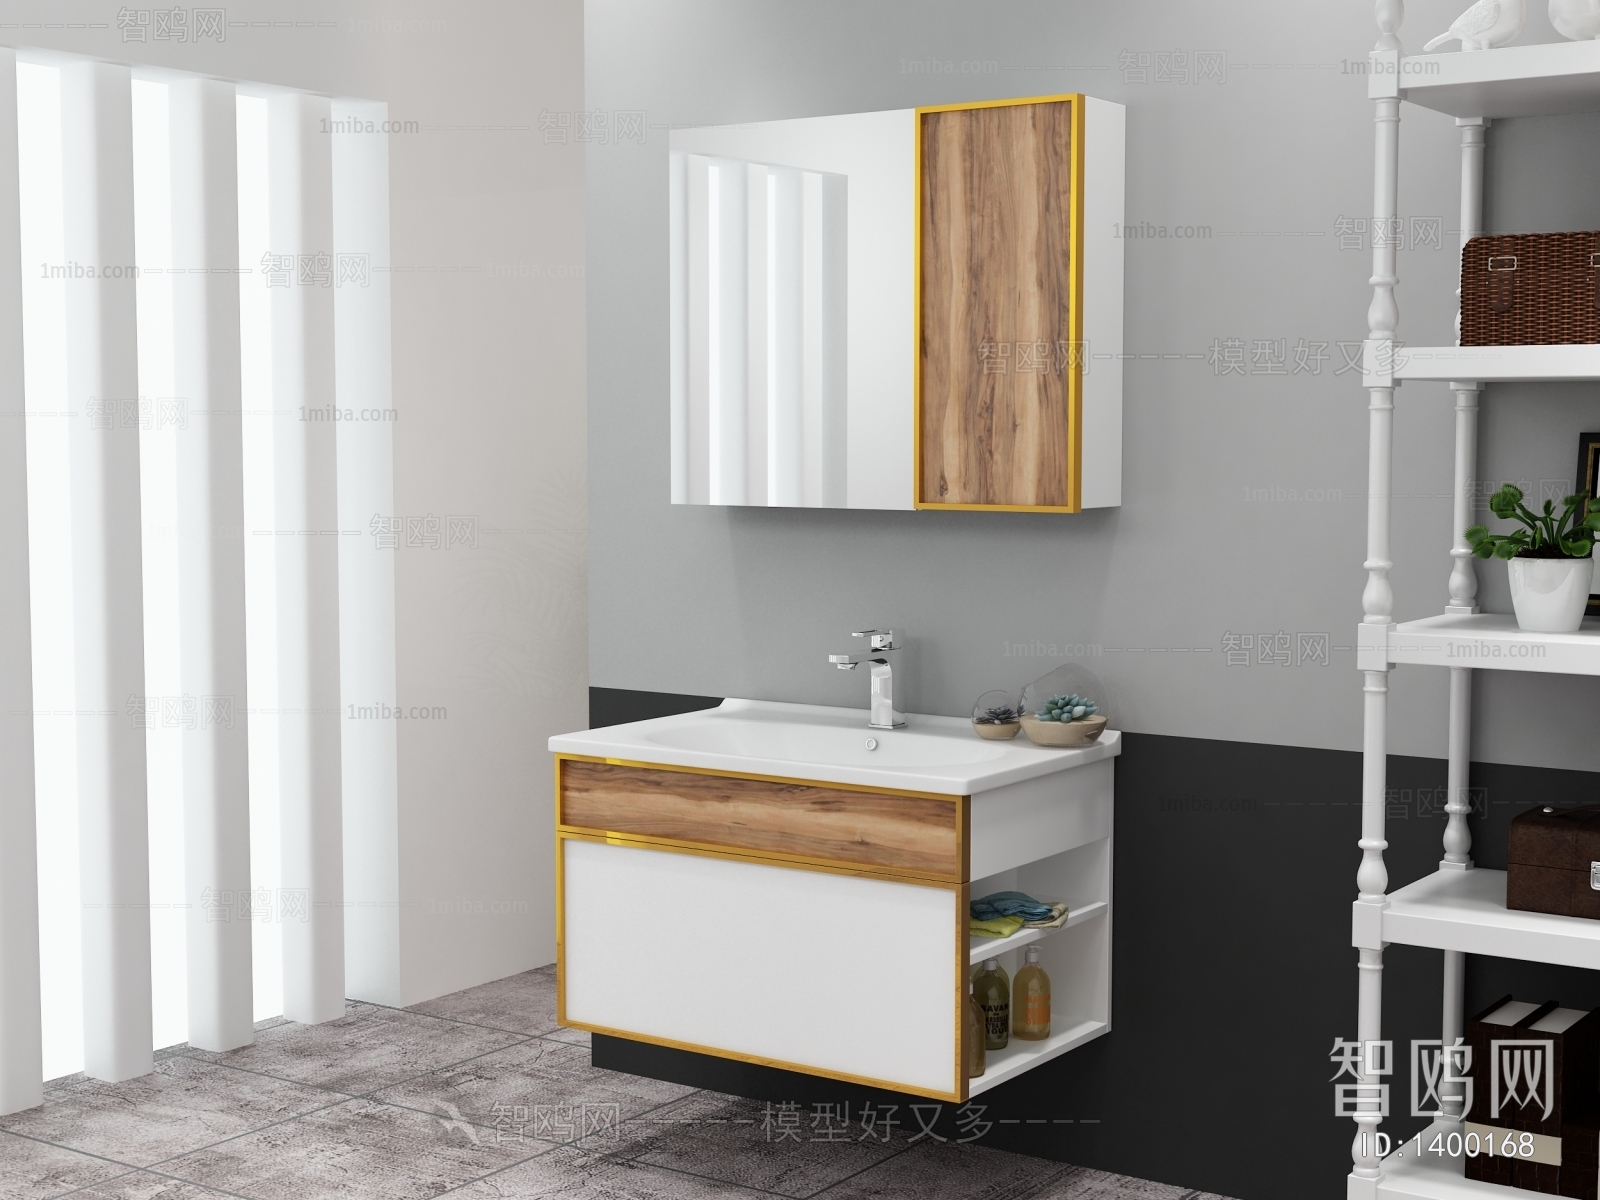 Mix And Match Styles Bathroom Cabinet Frame